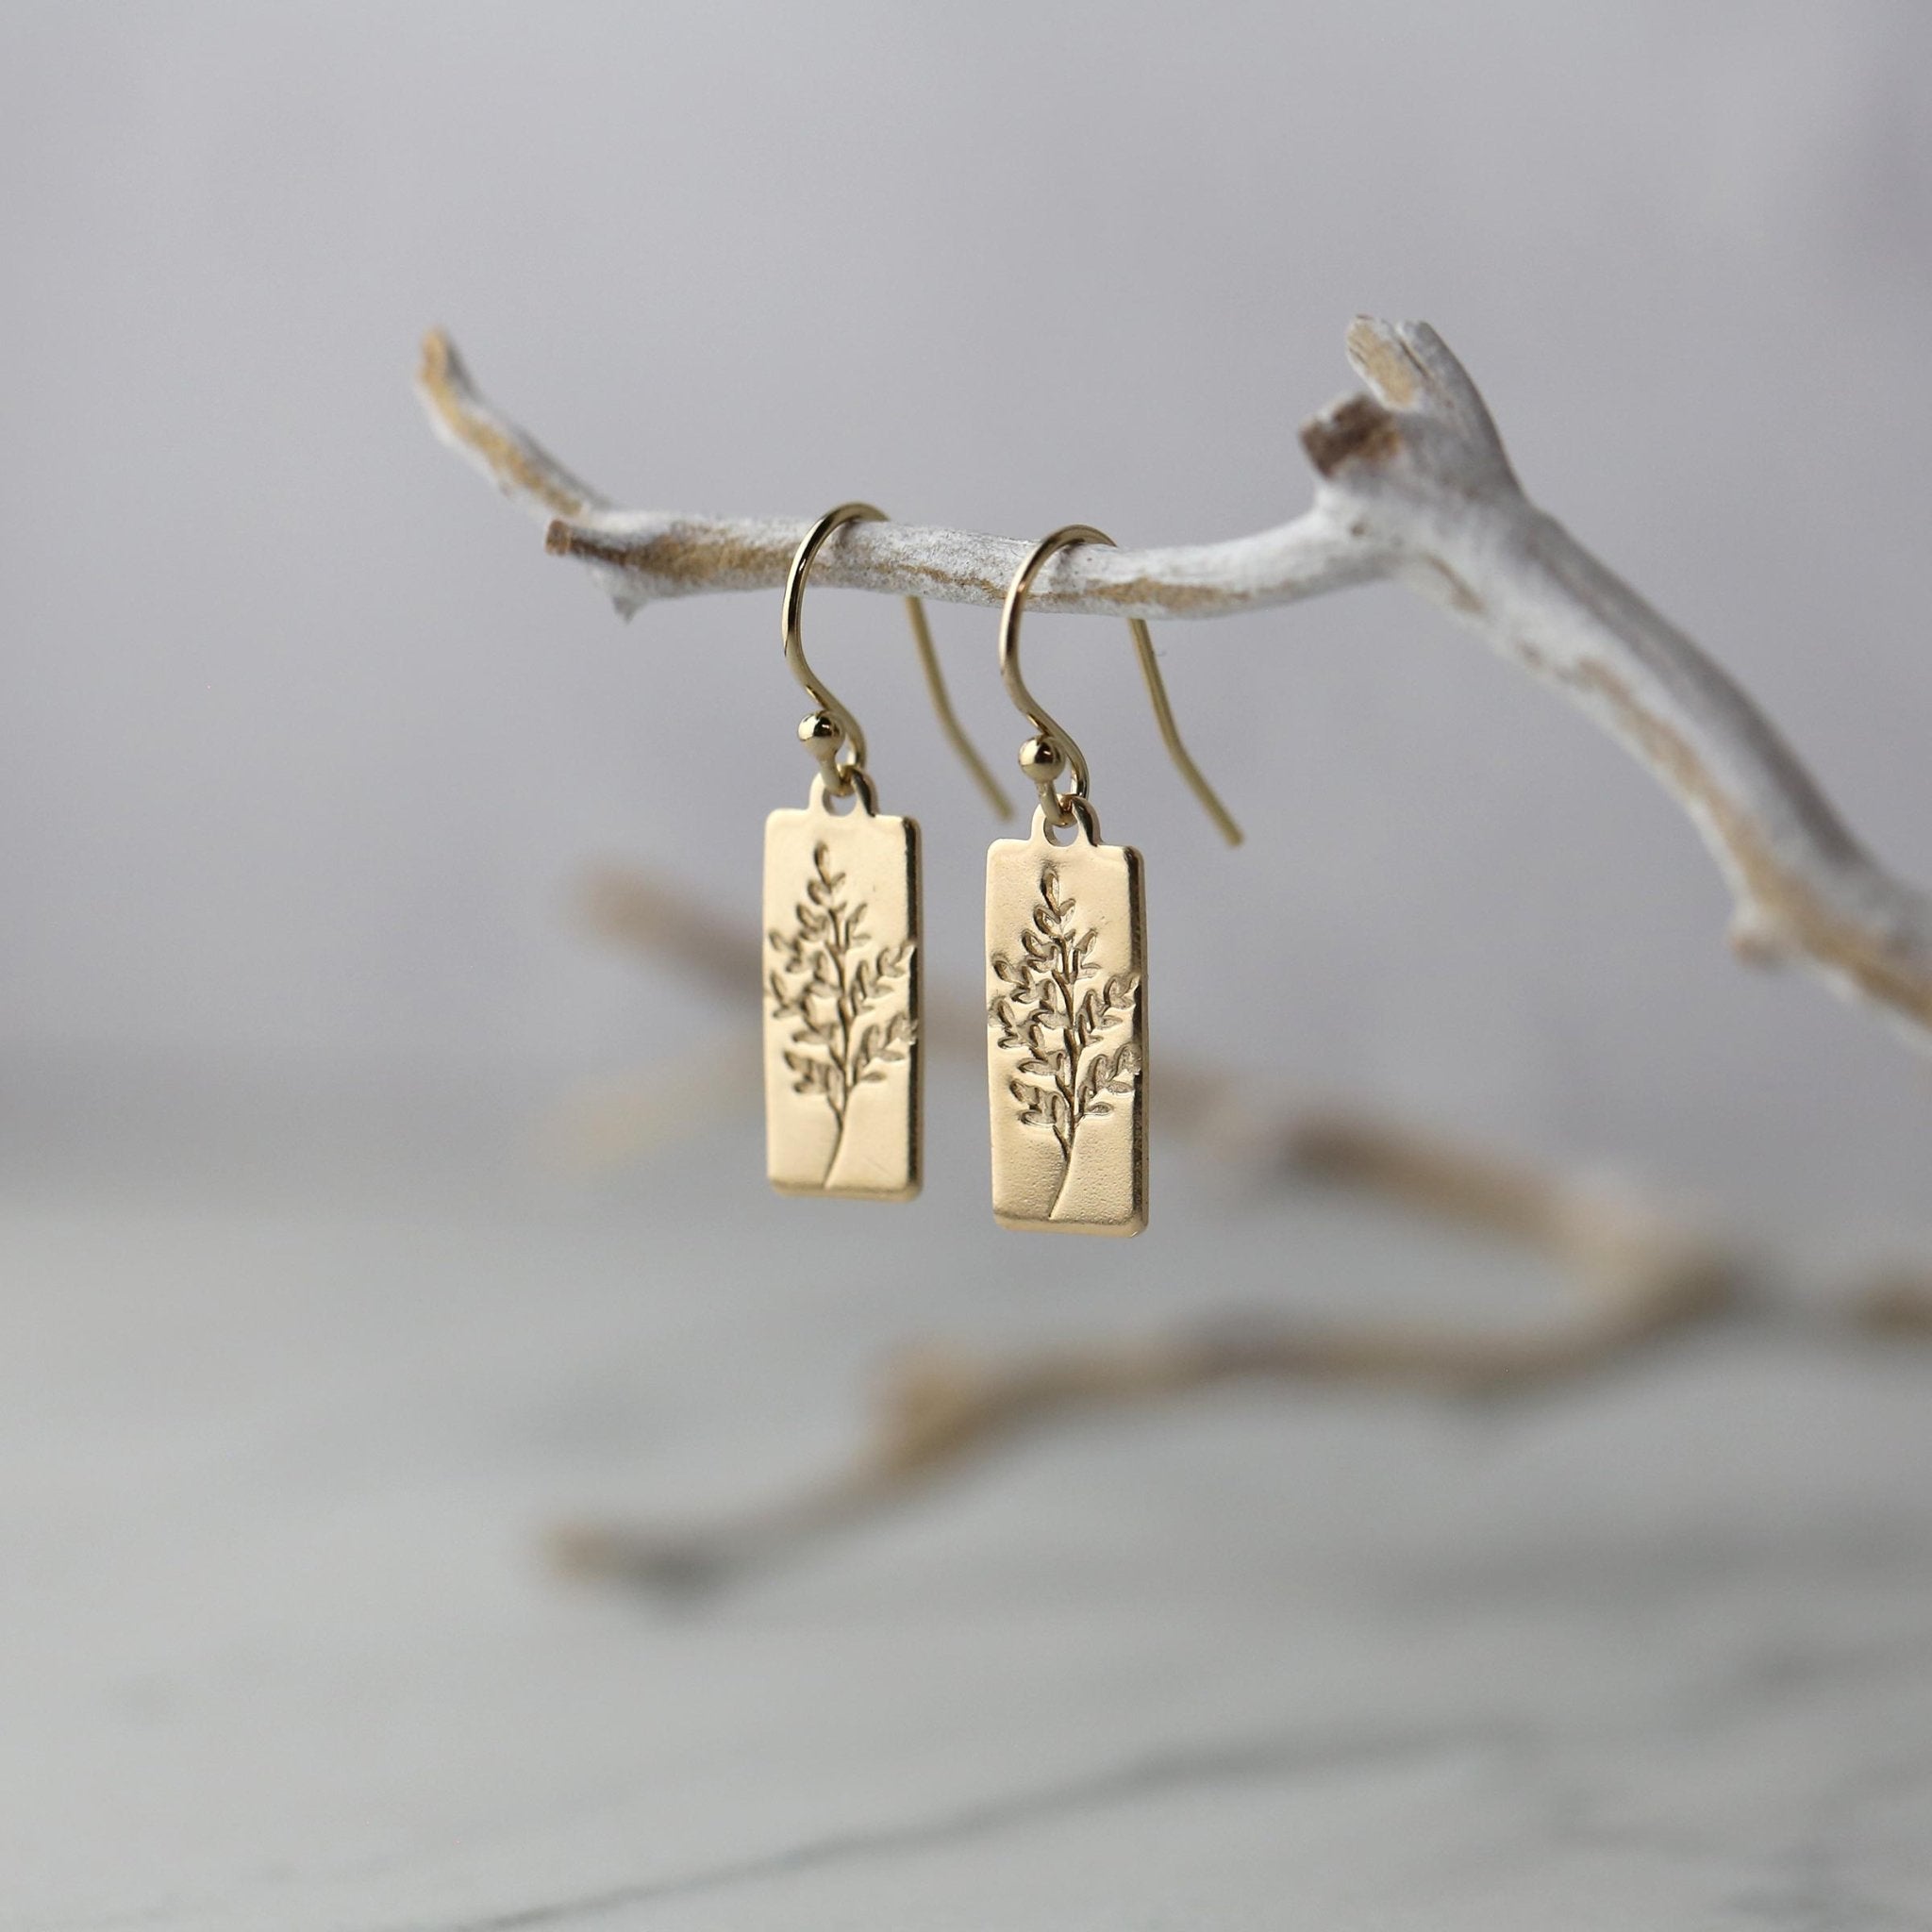 Gold Wildflower Tag Earrings handmade by Burnish